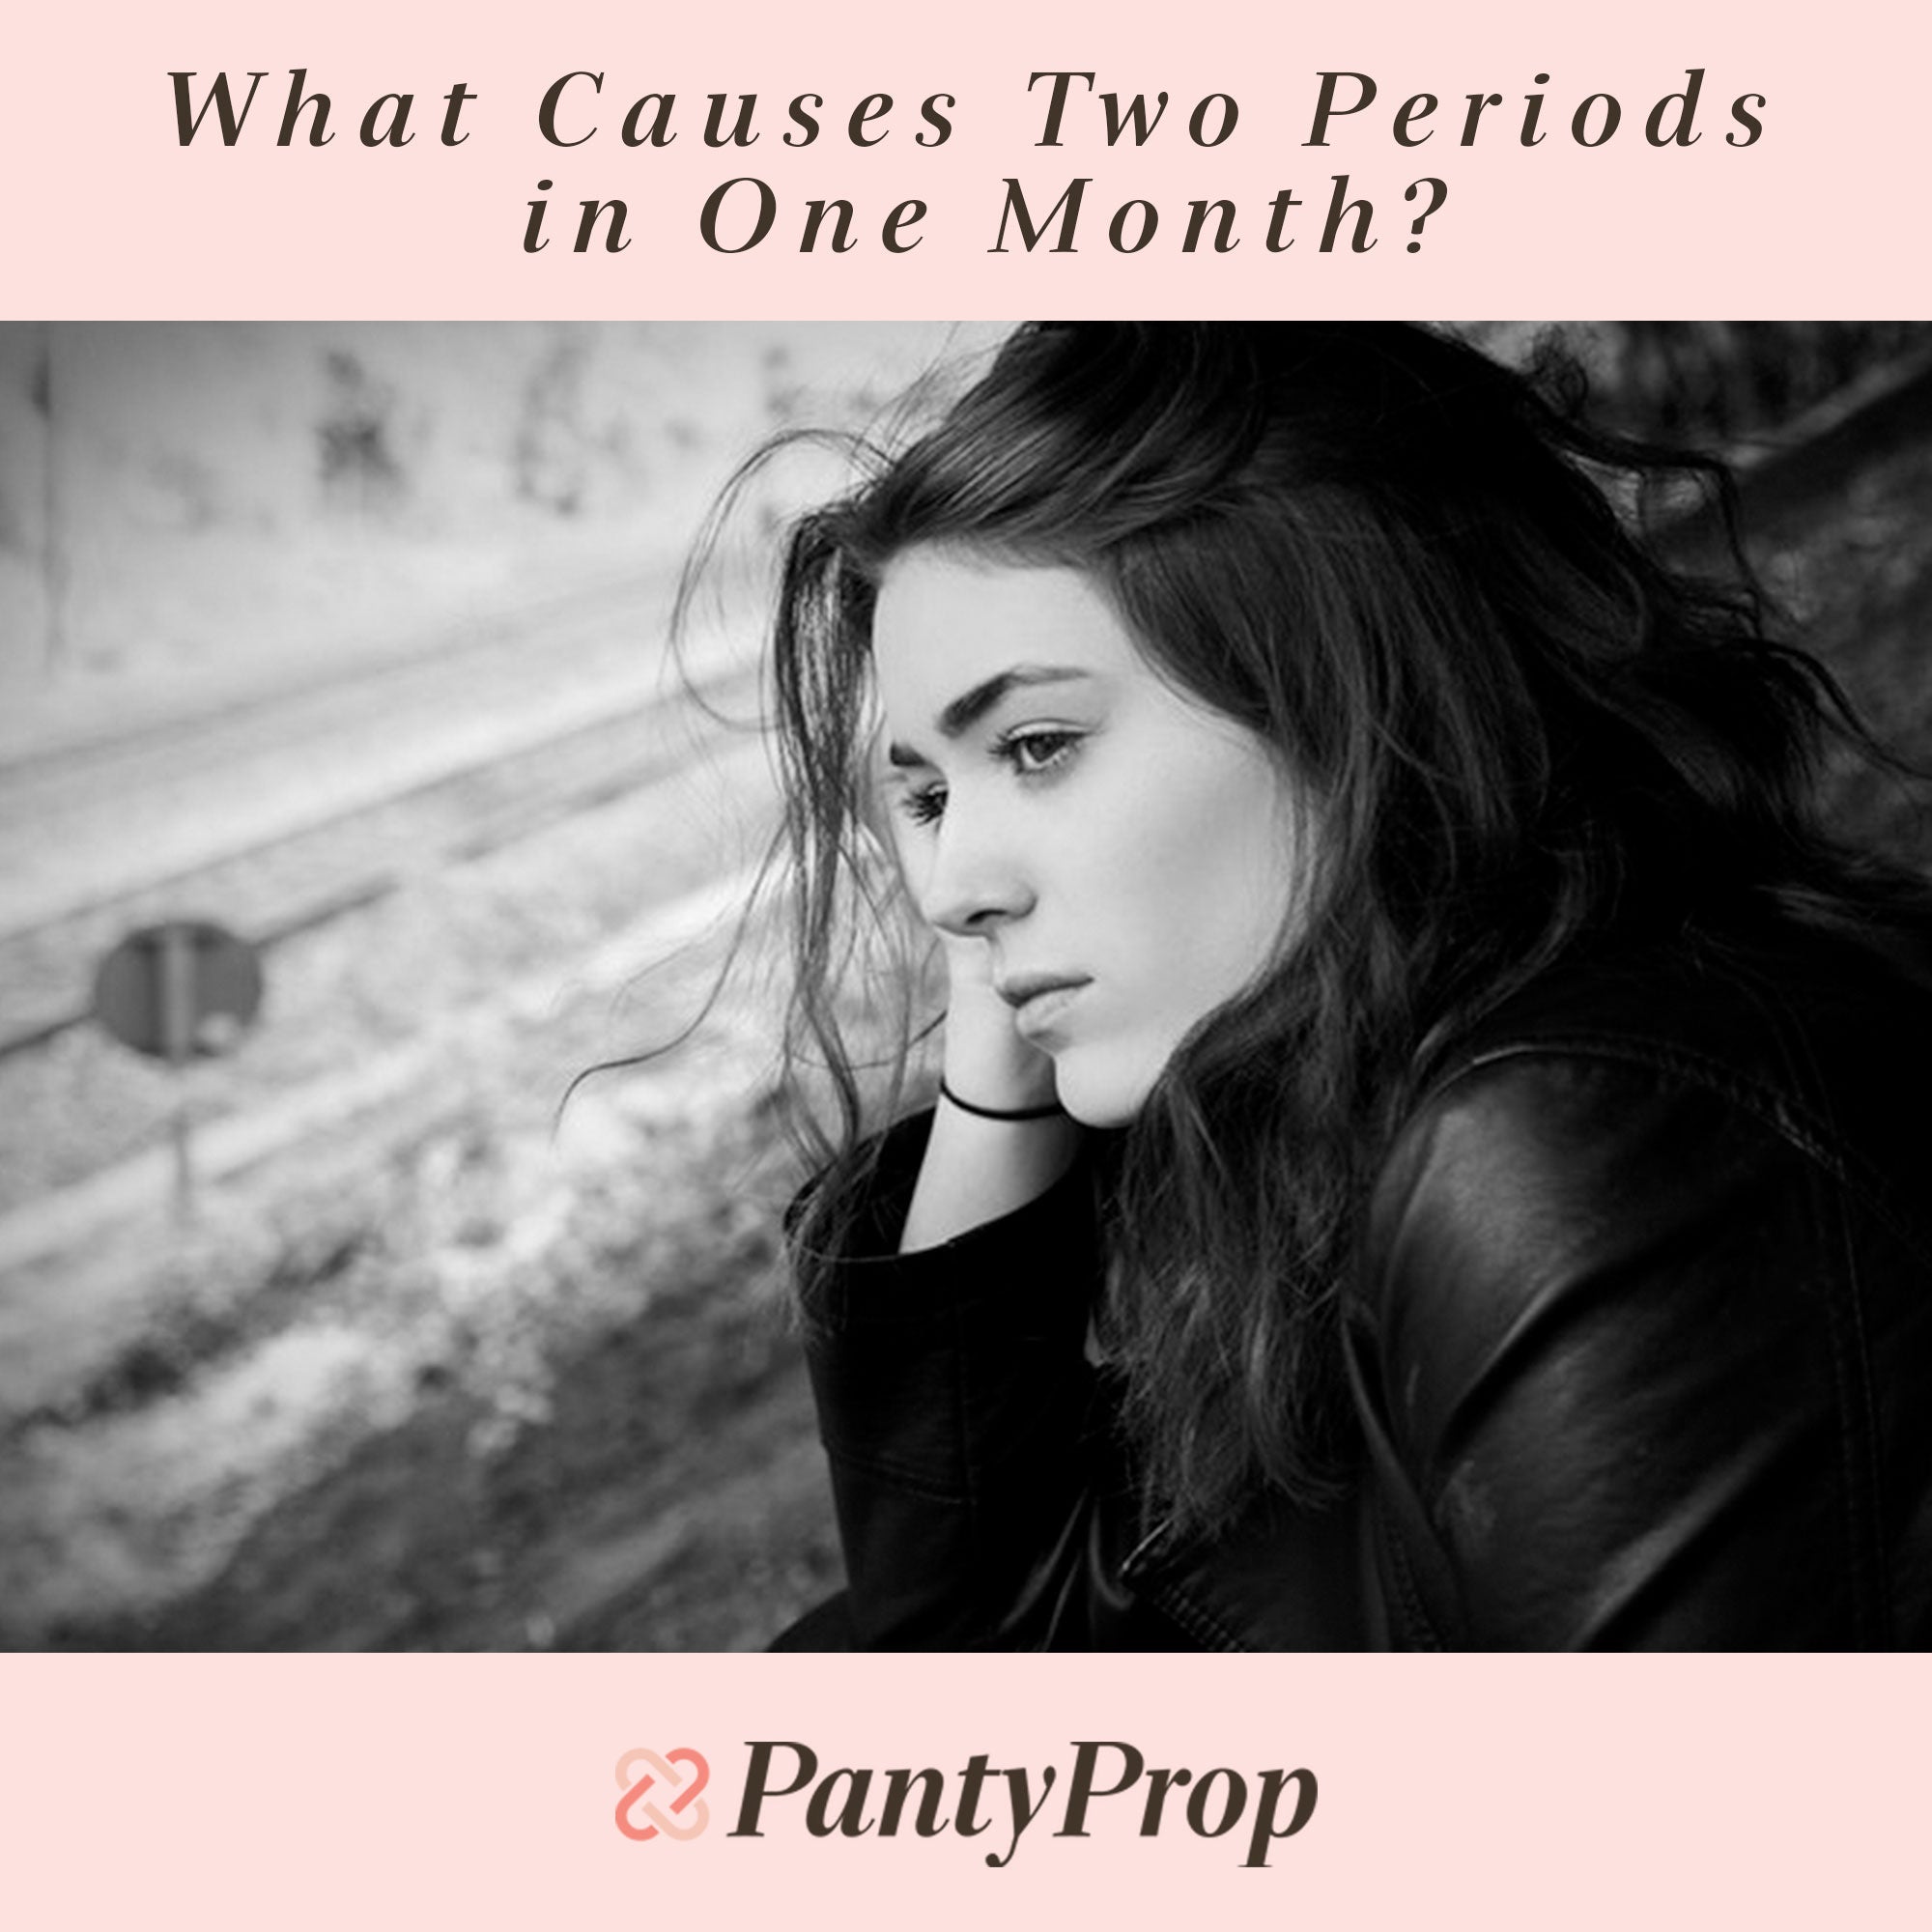 Two Periods in One Month: 7 Causes, Risks, Treatment